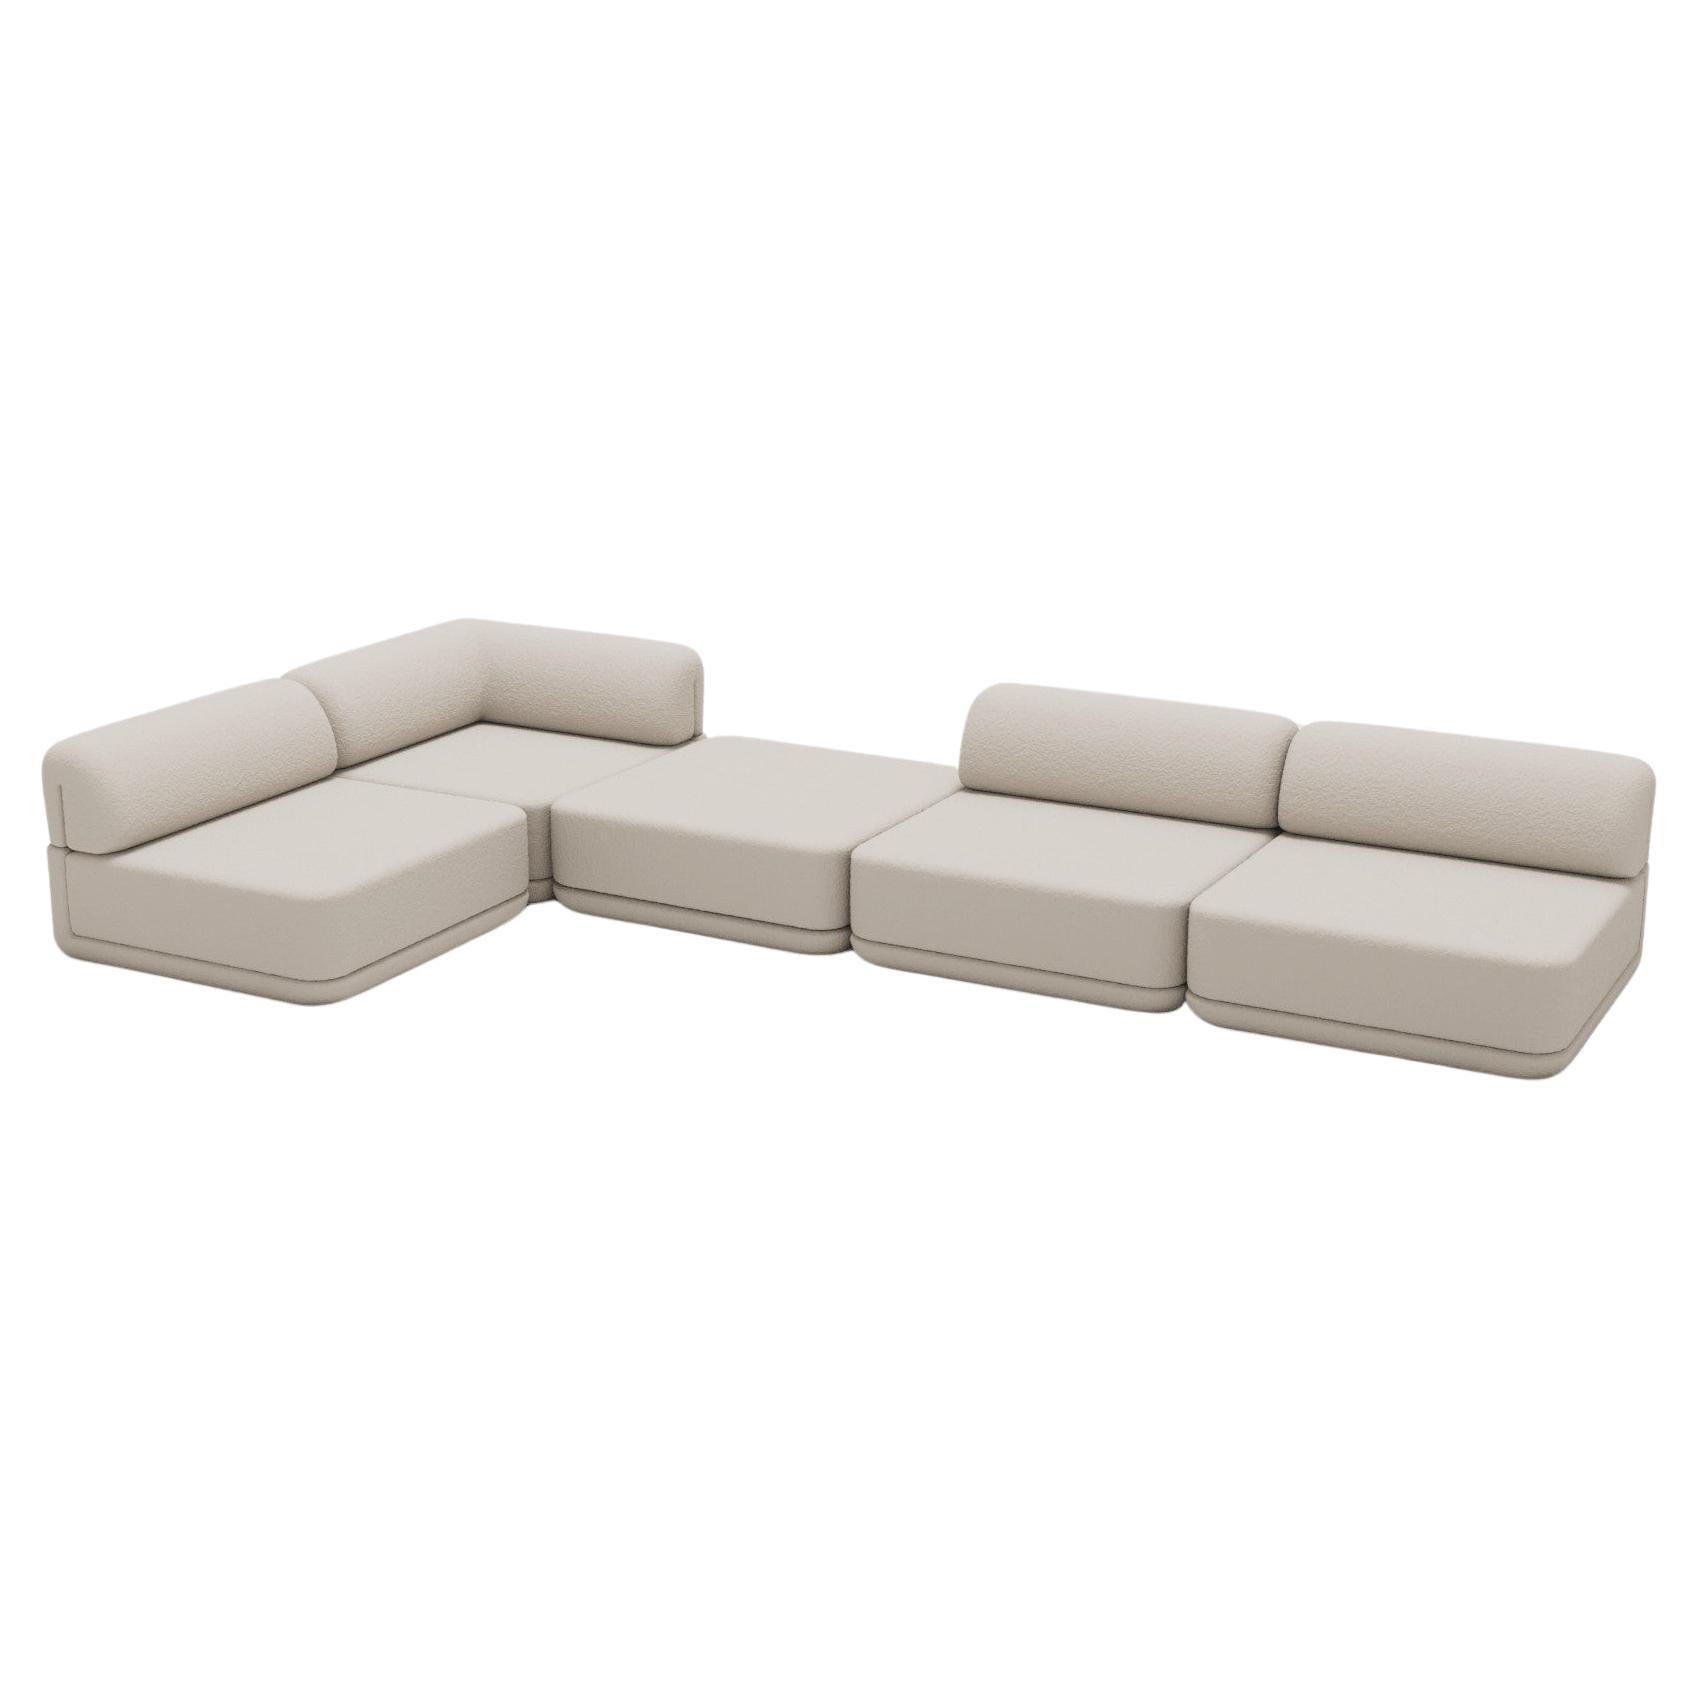 Corner Lounge Mix Sectional - Inspired by 70s Italian Luxury Furniture

Discover The Cube Sofa, where art meets adaptability. Its sculptural design and customizable comfort create endless possibilities for your living space. Make a statement,